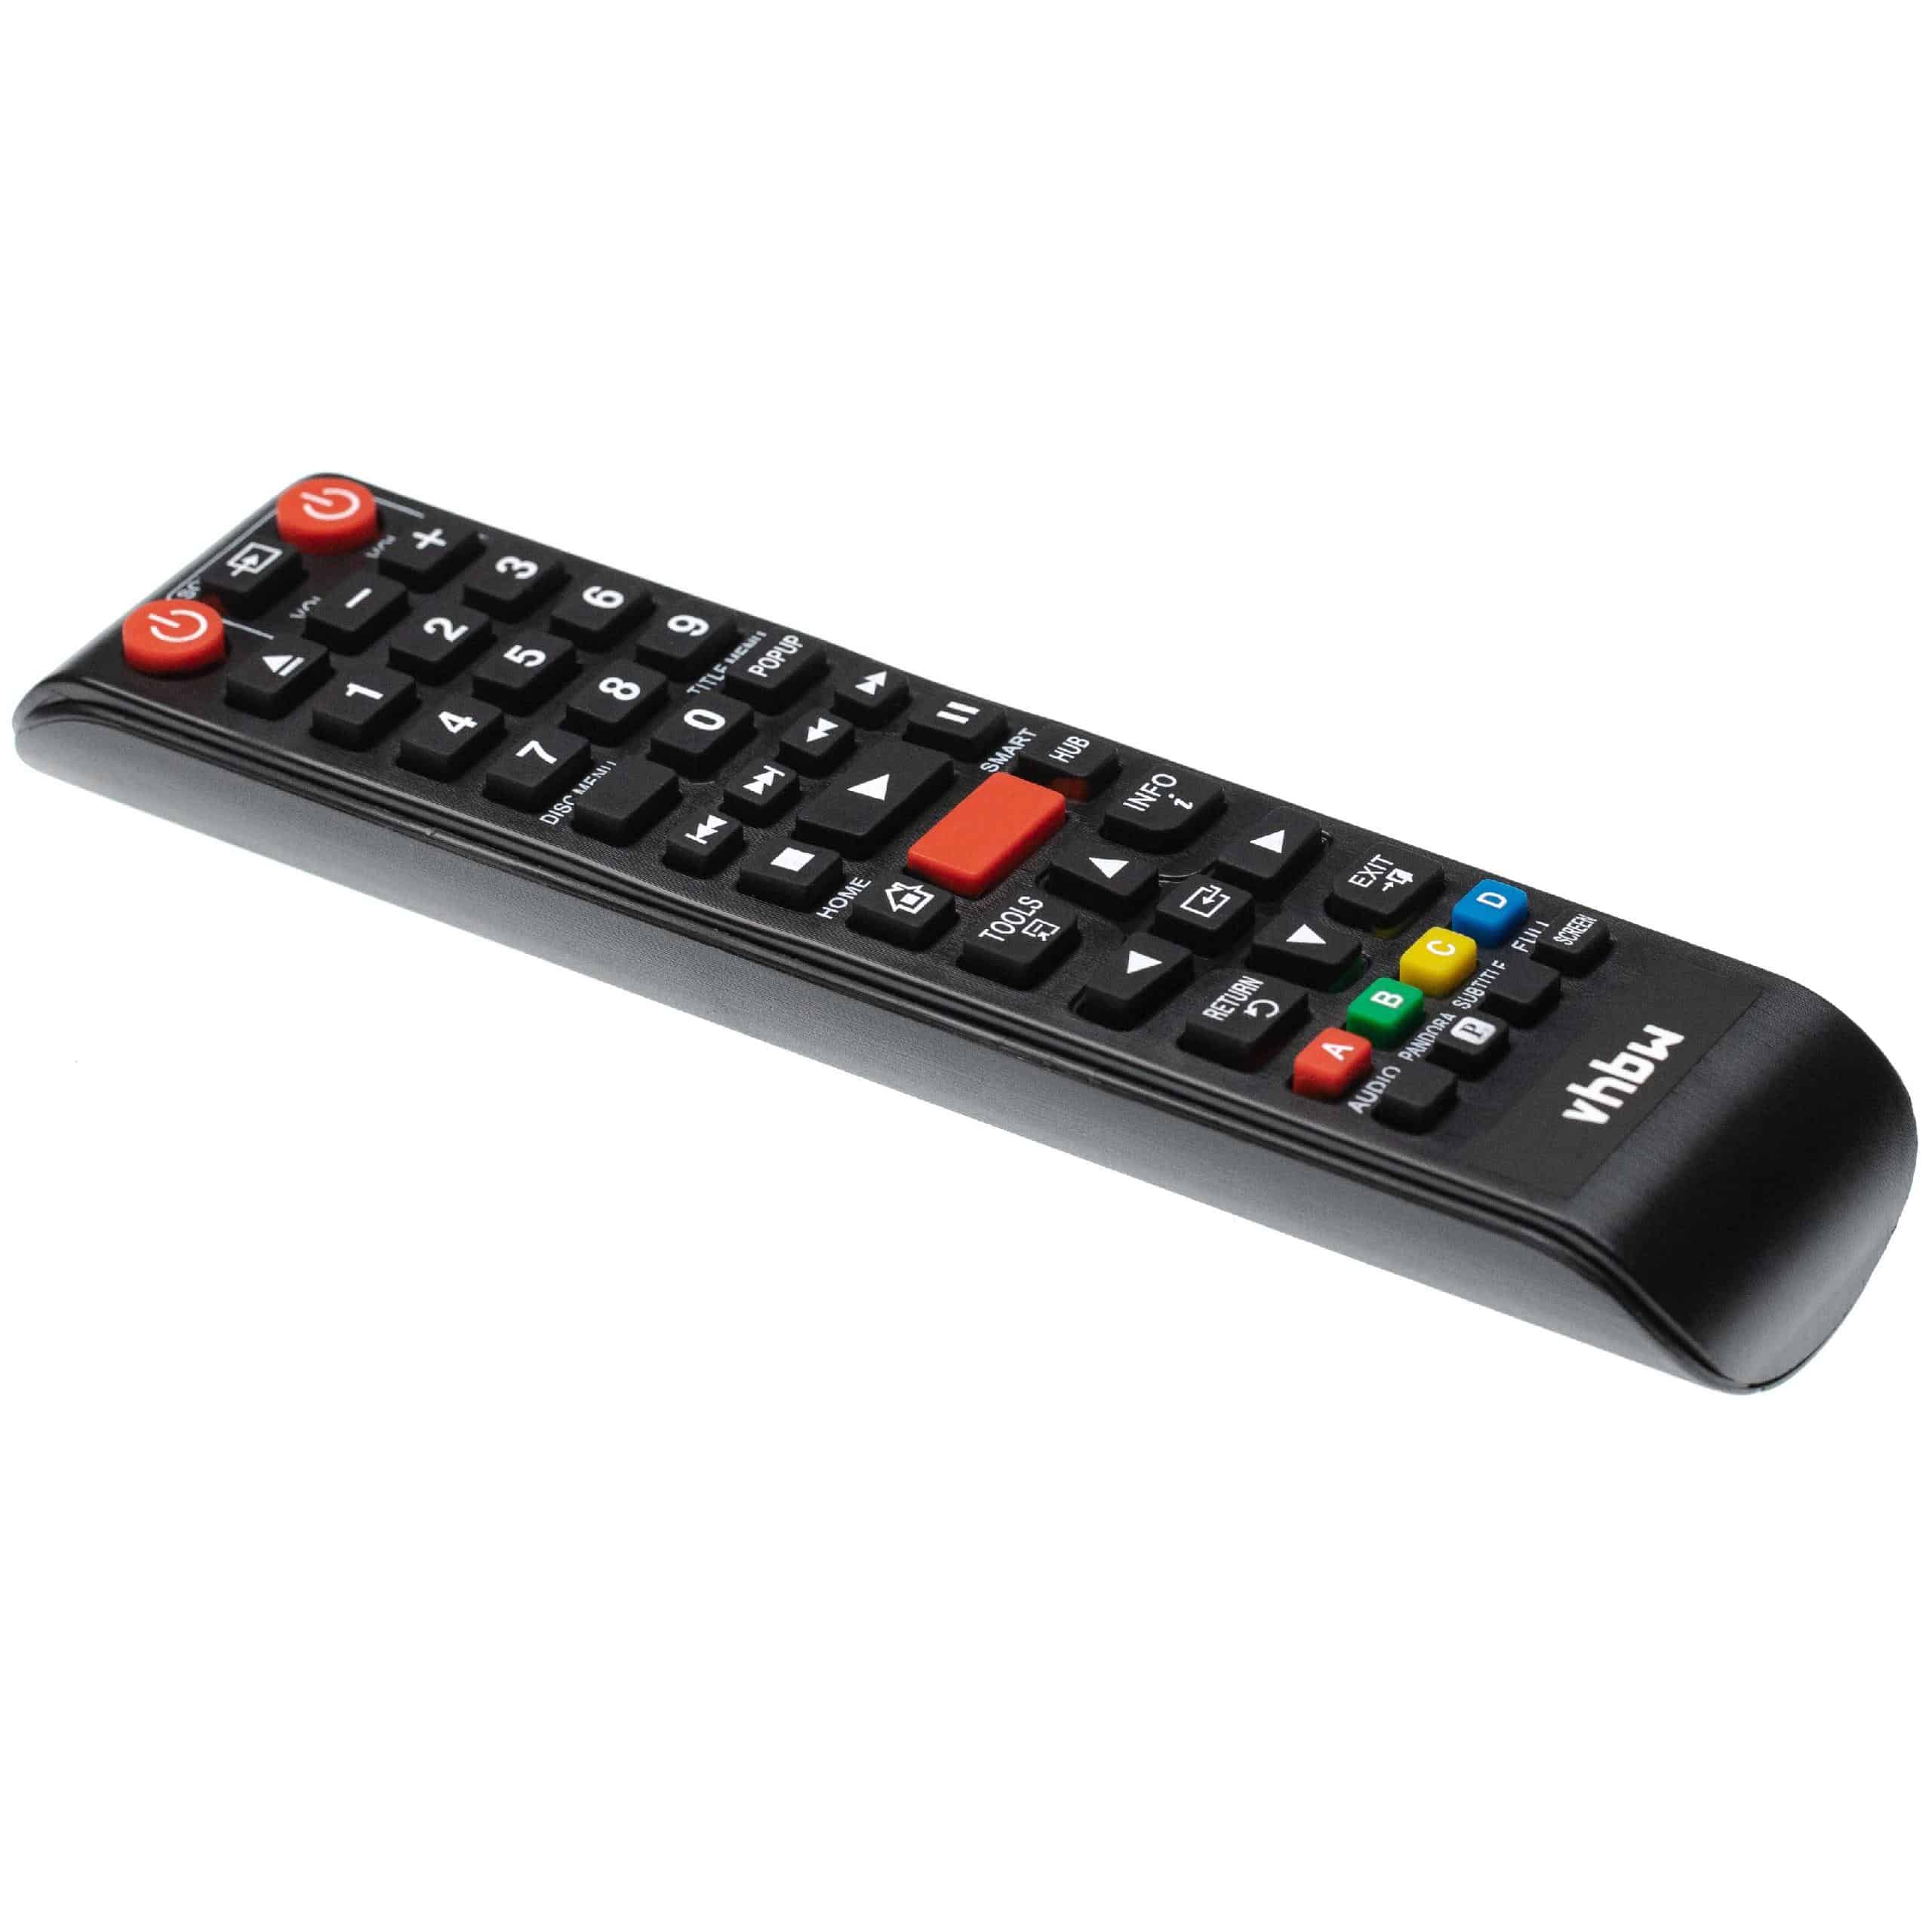 Remote Control replaces Samsung AK59-00145A for Samsung Blu-Ray Disc Player